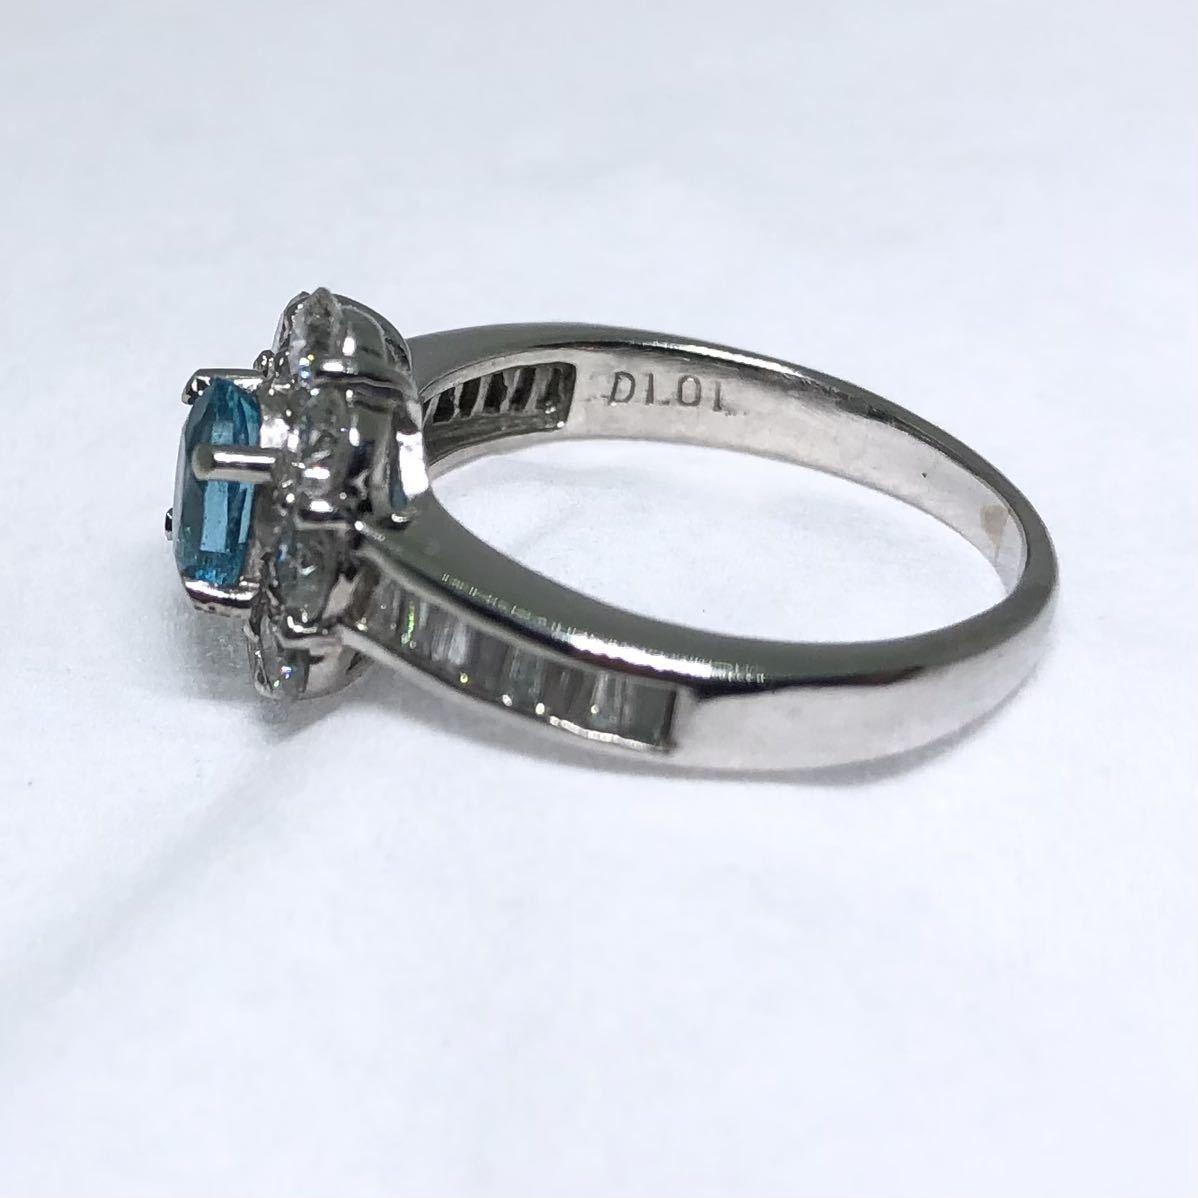 Pt900 apatite 1.01ct ring mere diamond 1.01 diamond 10 number gross weight 5.4g. another result attaching 